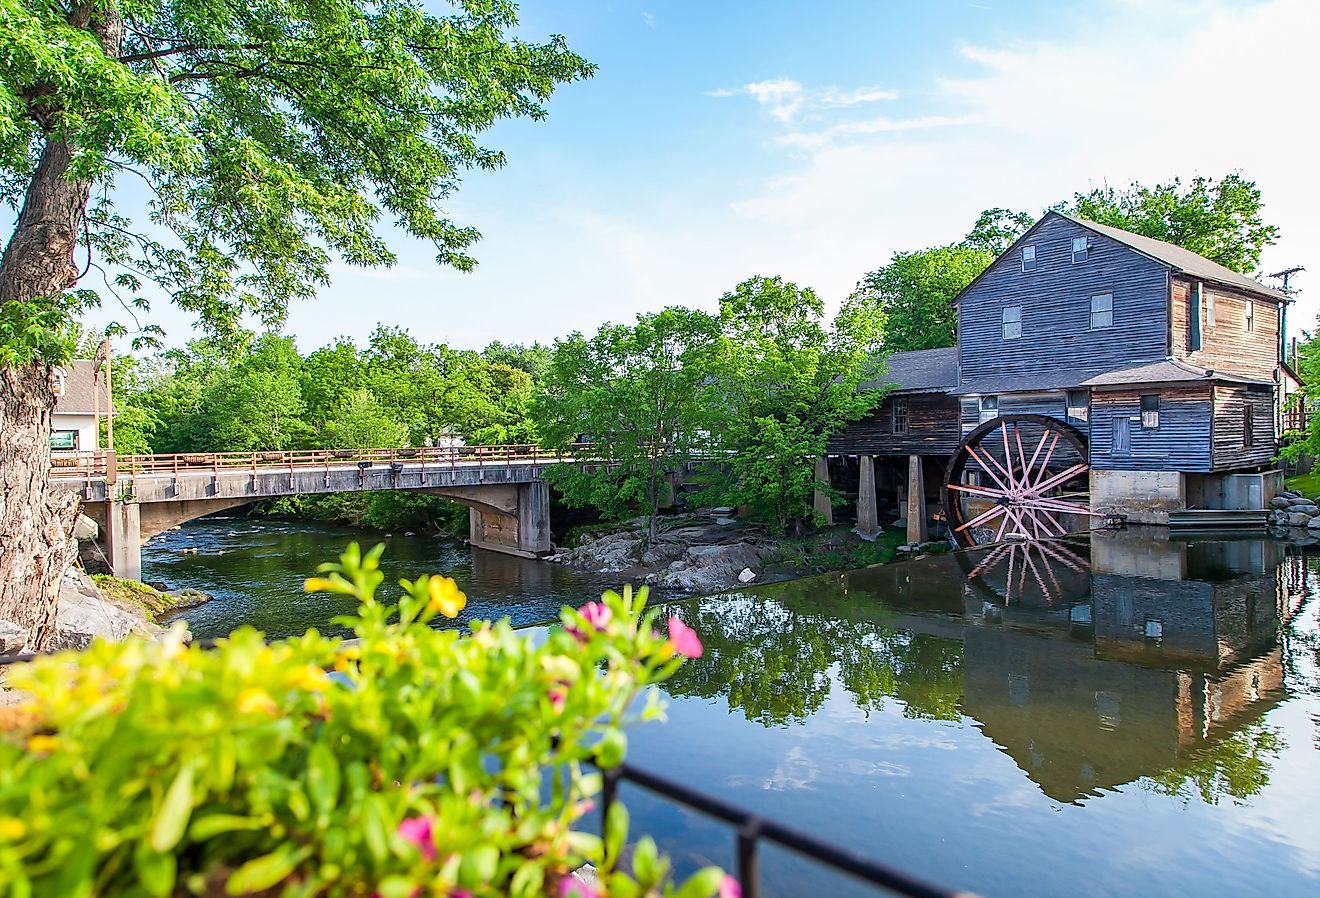 Flowers blooming at the Old Mill in Pigeon Forge, Tennessee.